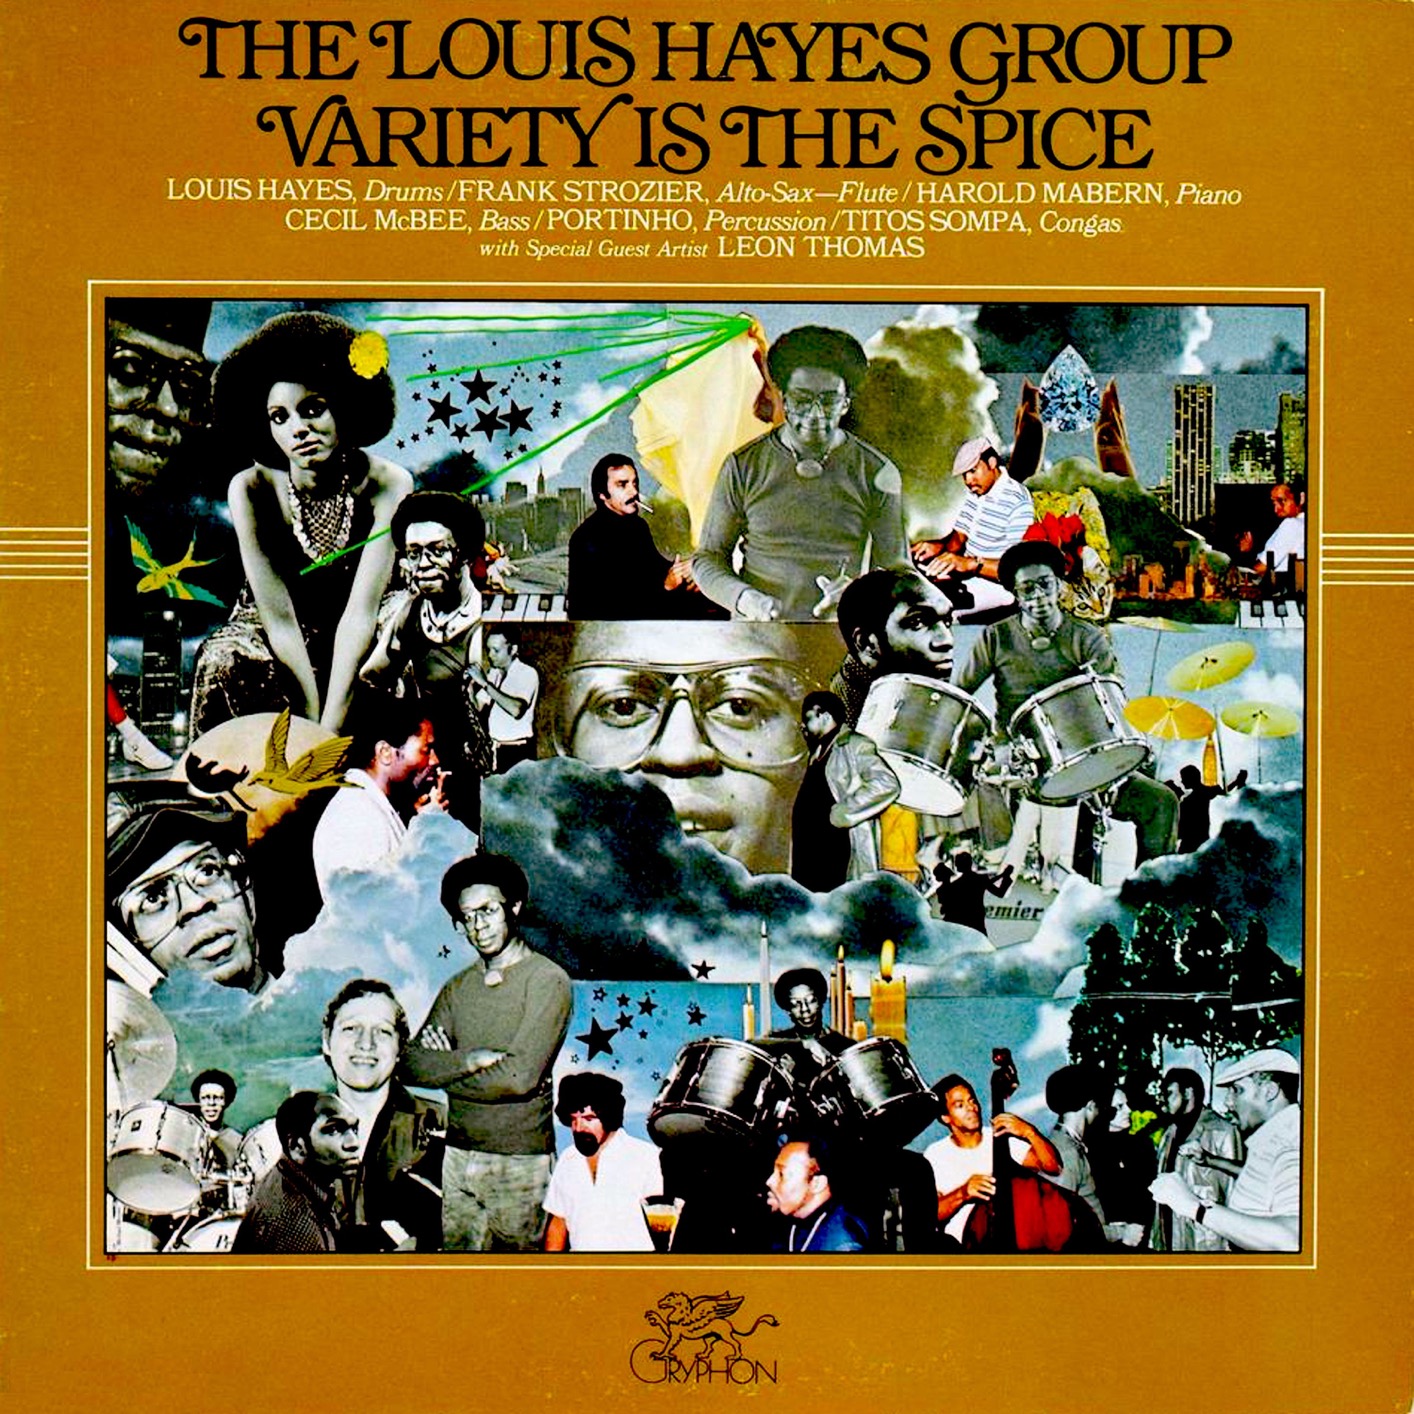 The Louis Hayes Group - Variety is the Spice (1979/2019) [FLAC 24bit/96kHz]